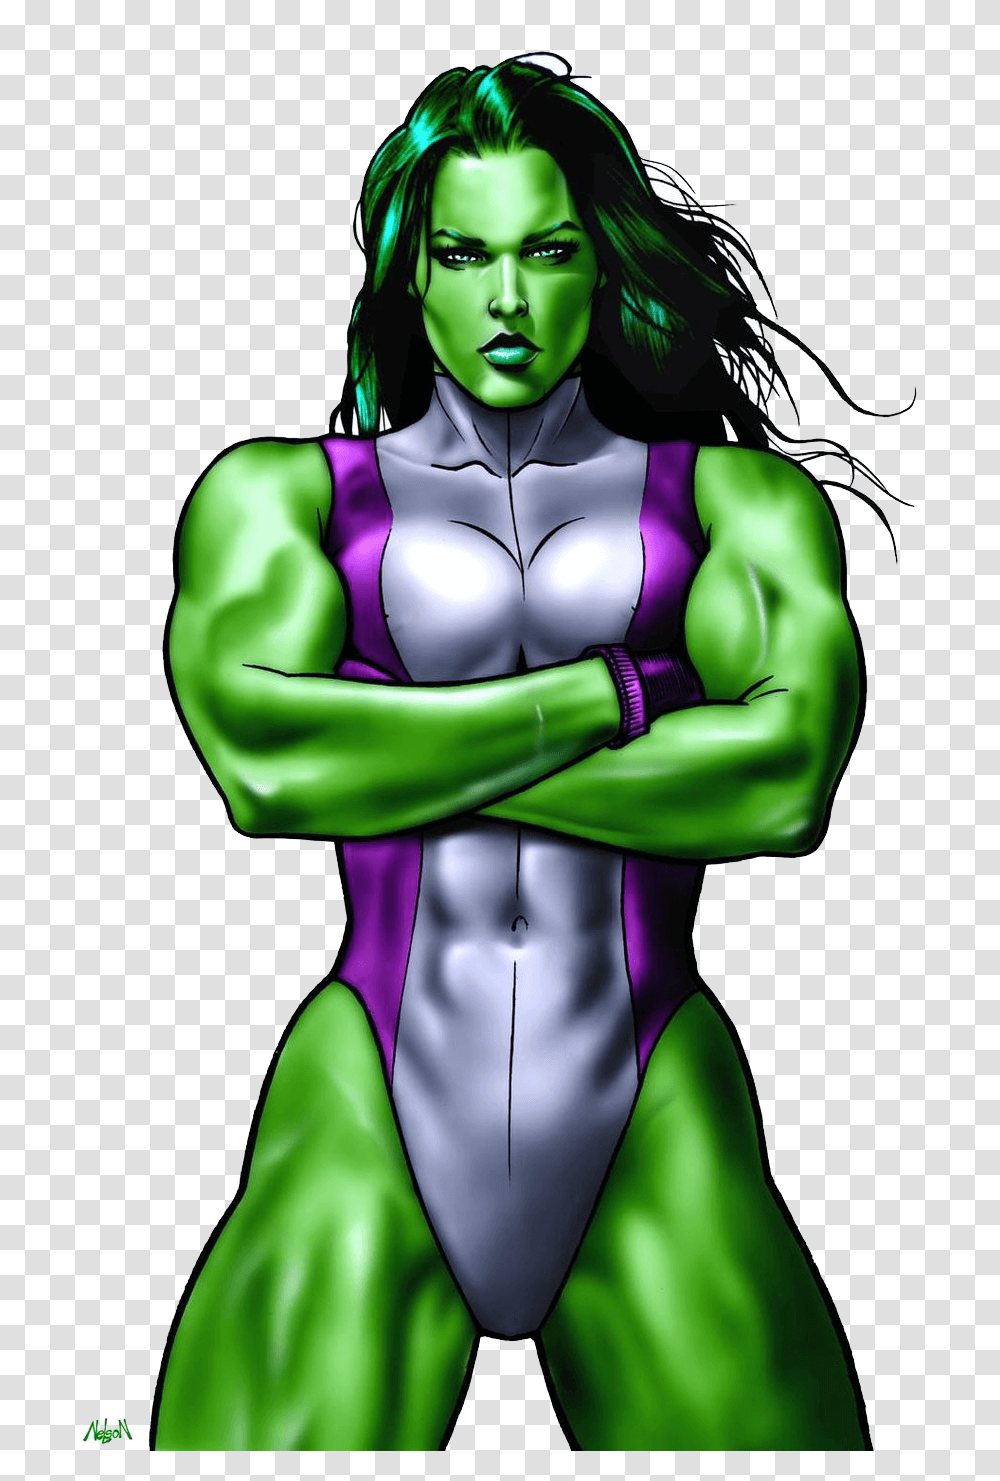 Hulkpng Images Collection For Free Download Llumaccat Gamora, Green, Spandex, Graphics, Art Transparent Png